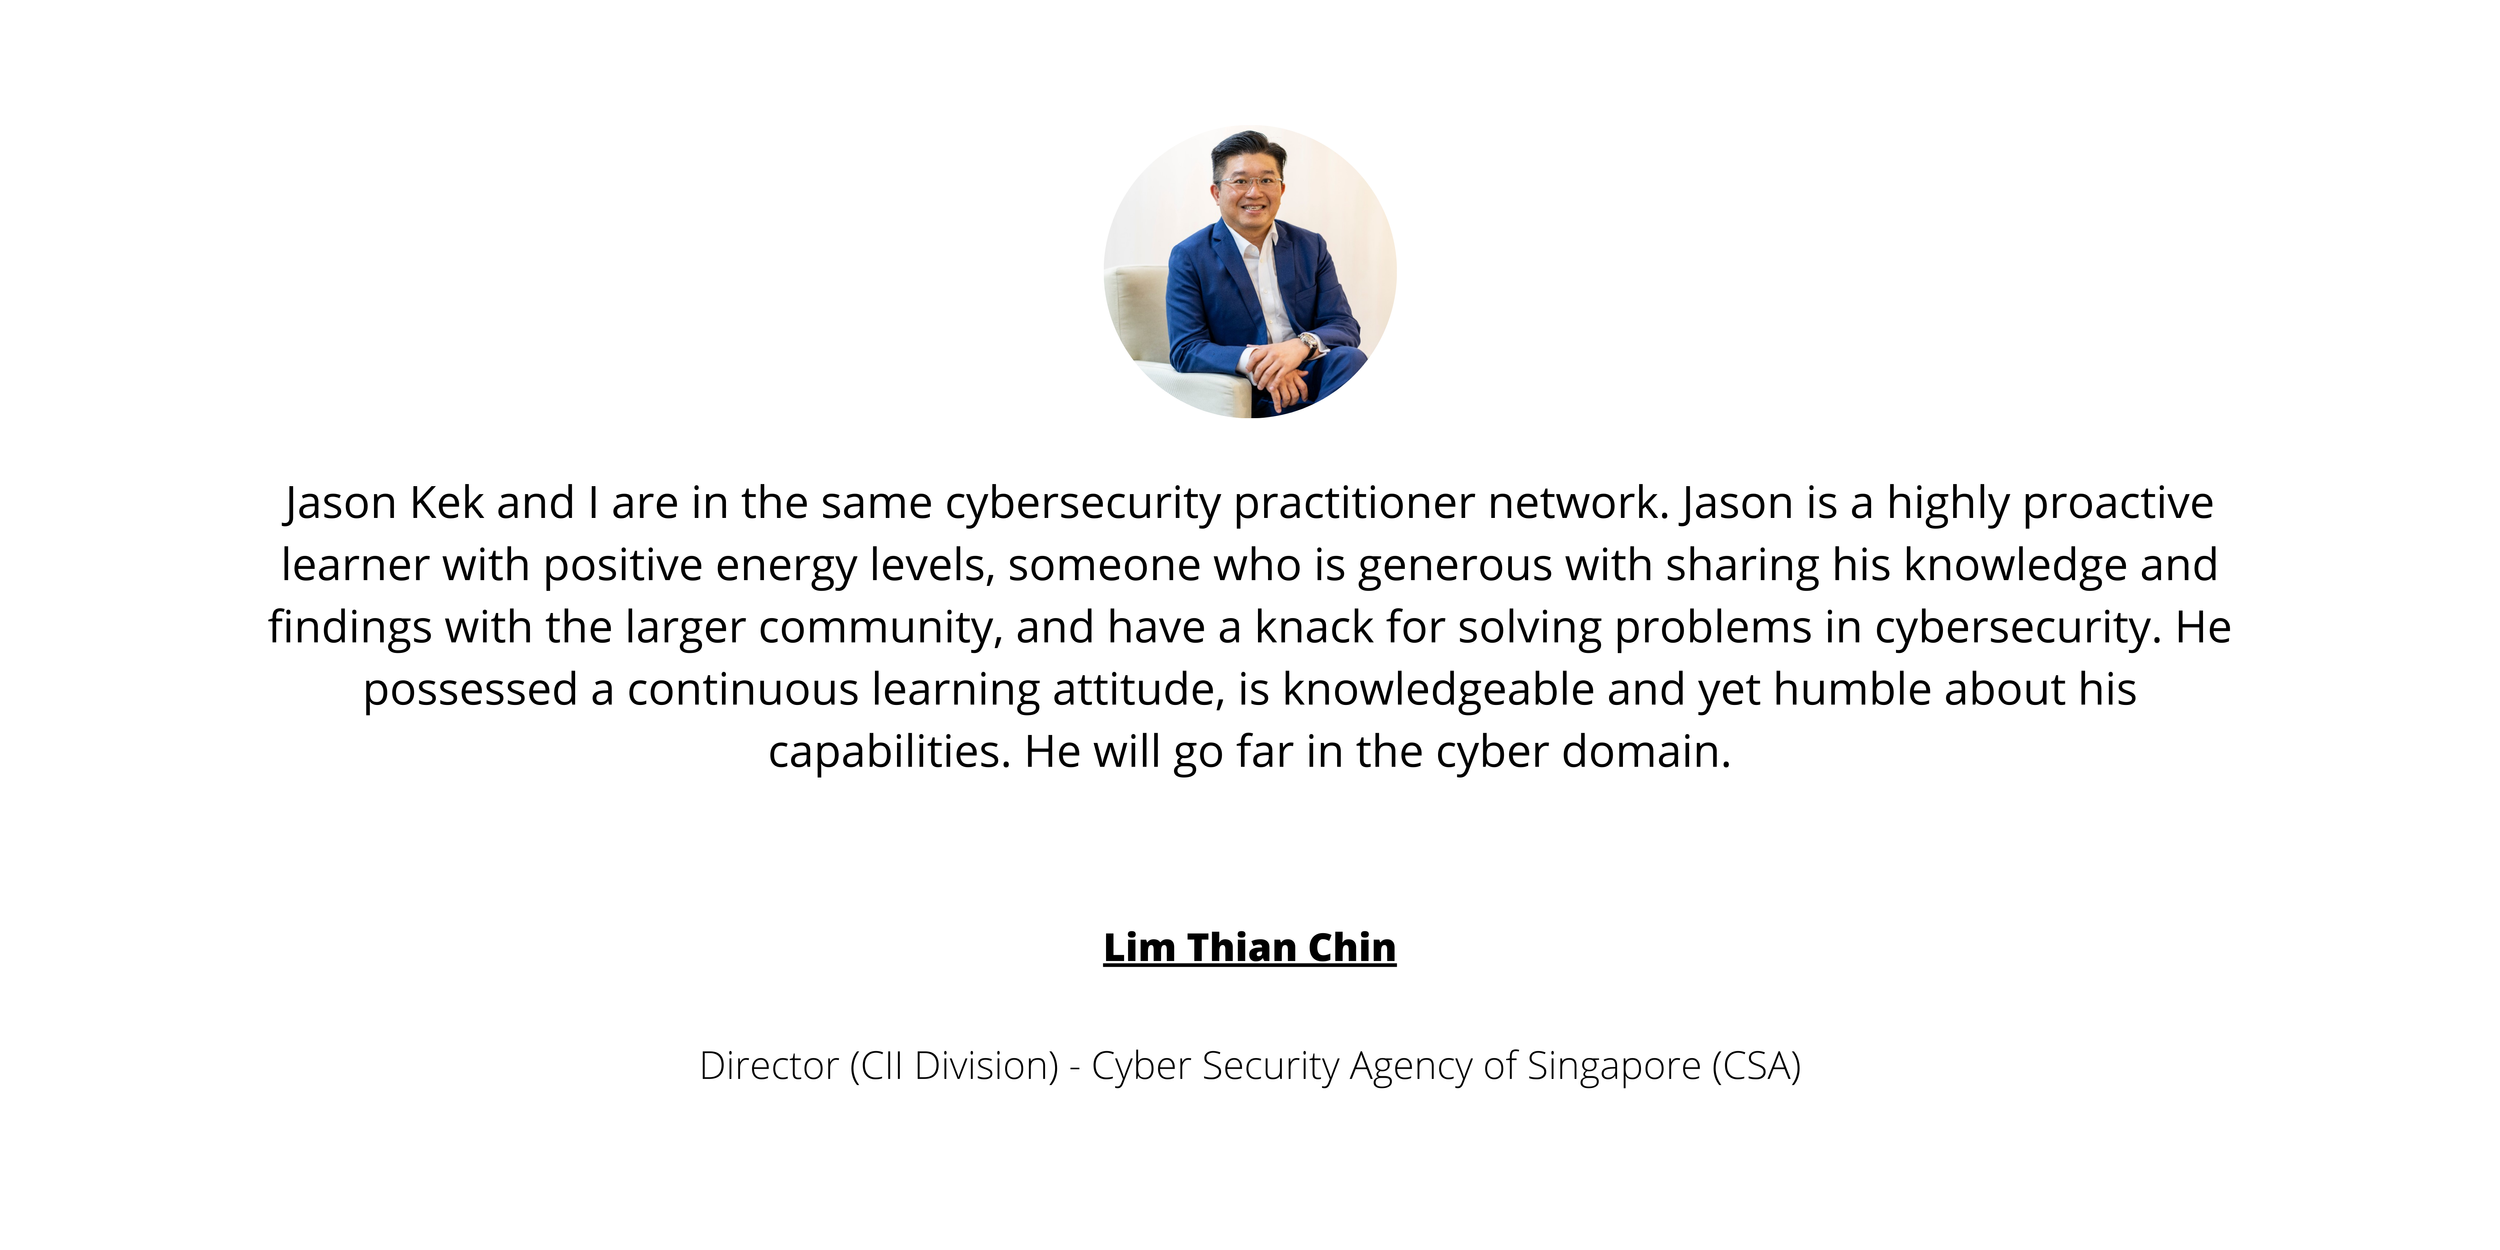 Jason gained practical and valuable SOC analyst knowledge while working for about 6 months internship in CyberPsdfdsfds Cyber Security and the desire to learn more..png